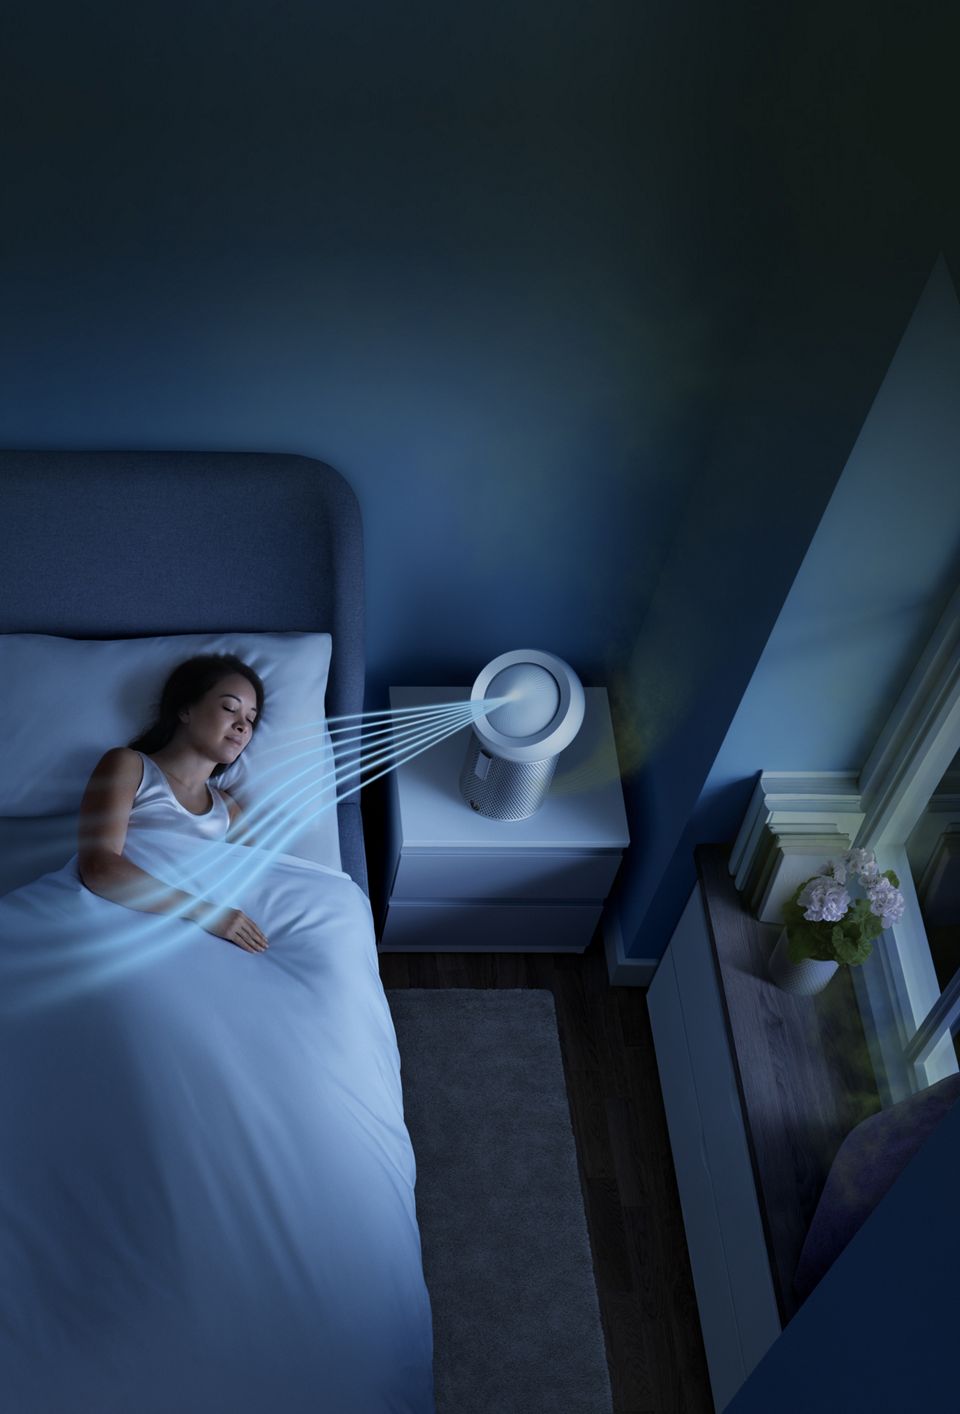 Splitscreen of an uncomfortable woman in bed surrounded by sources of indoor air pollution, and a woman with a Dyson personal purifying fan enjoying a comfortable night's rest